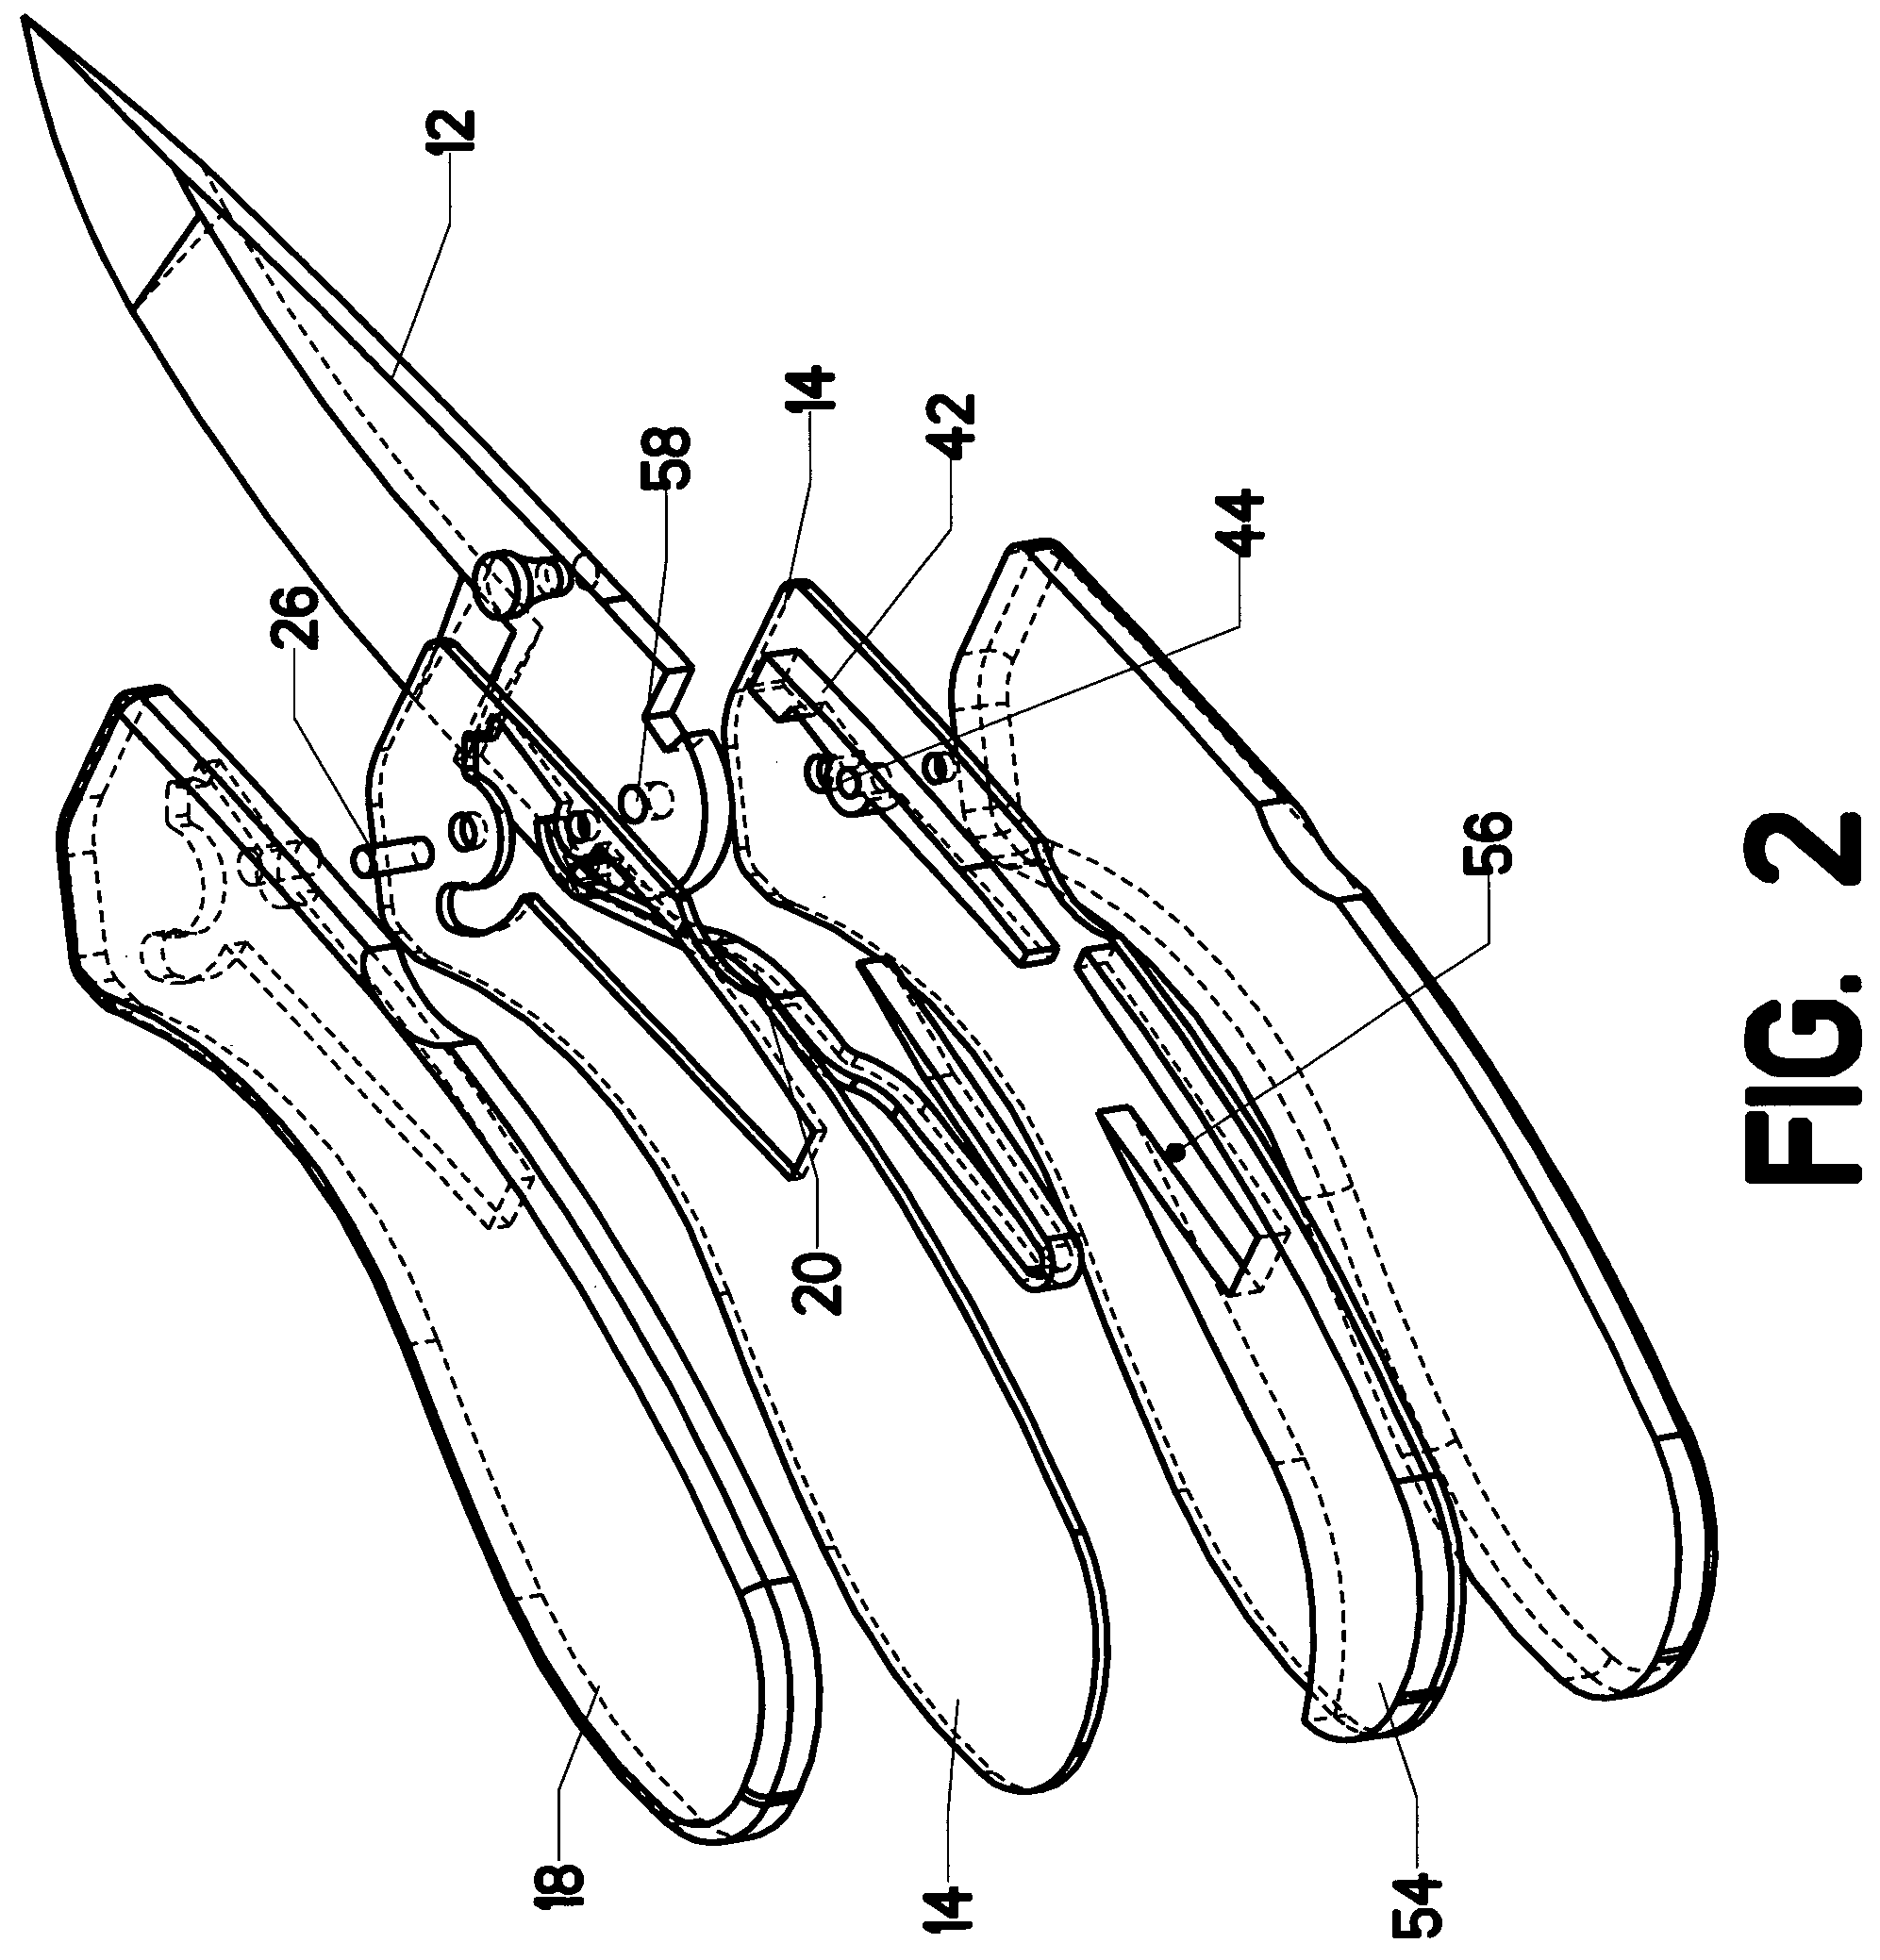 Knife with spring-assisted blade articulation mechanism